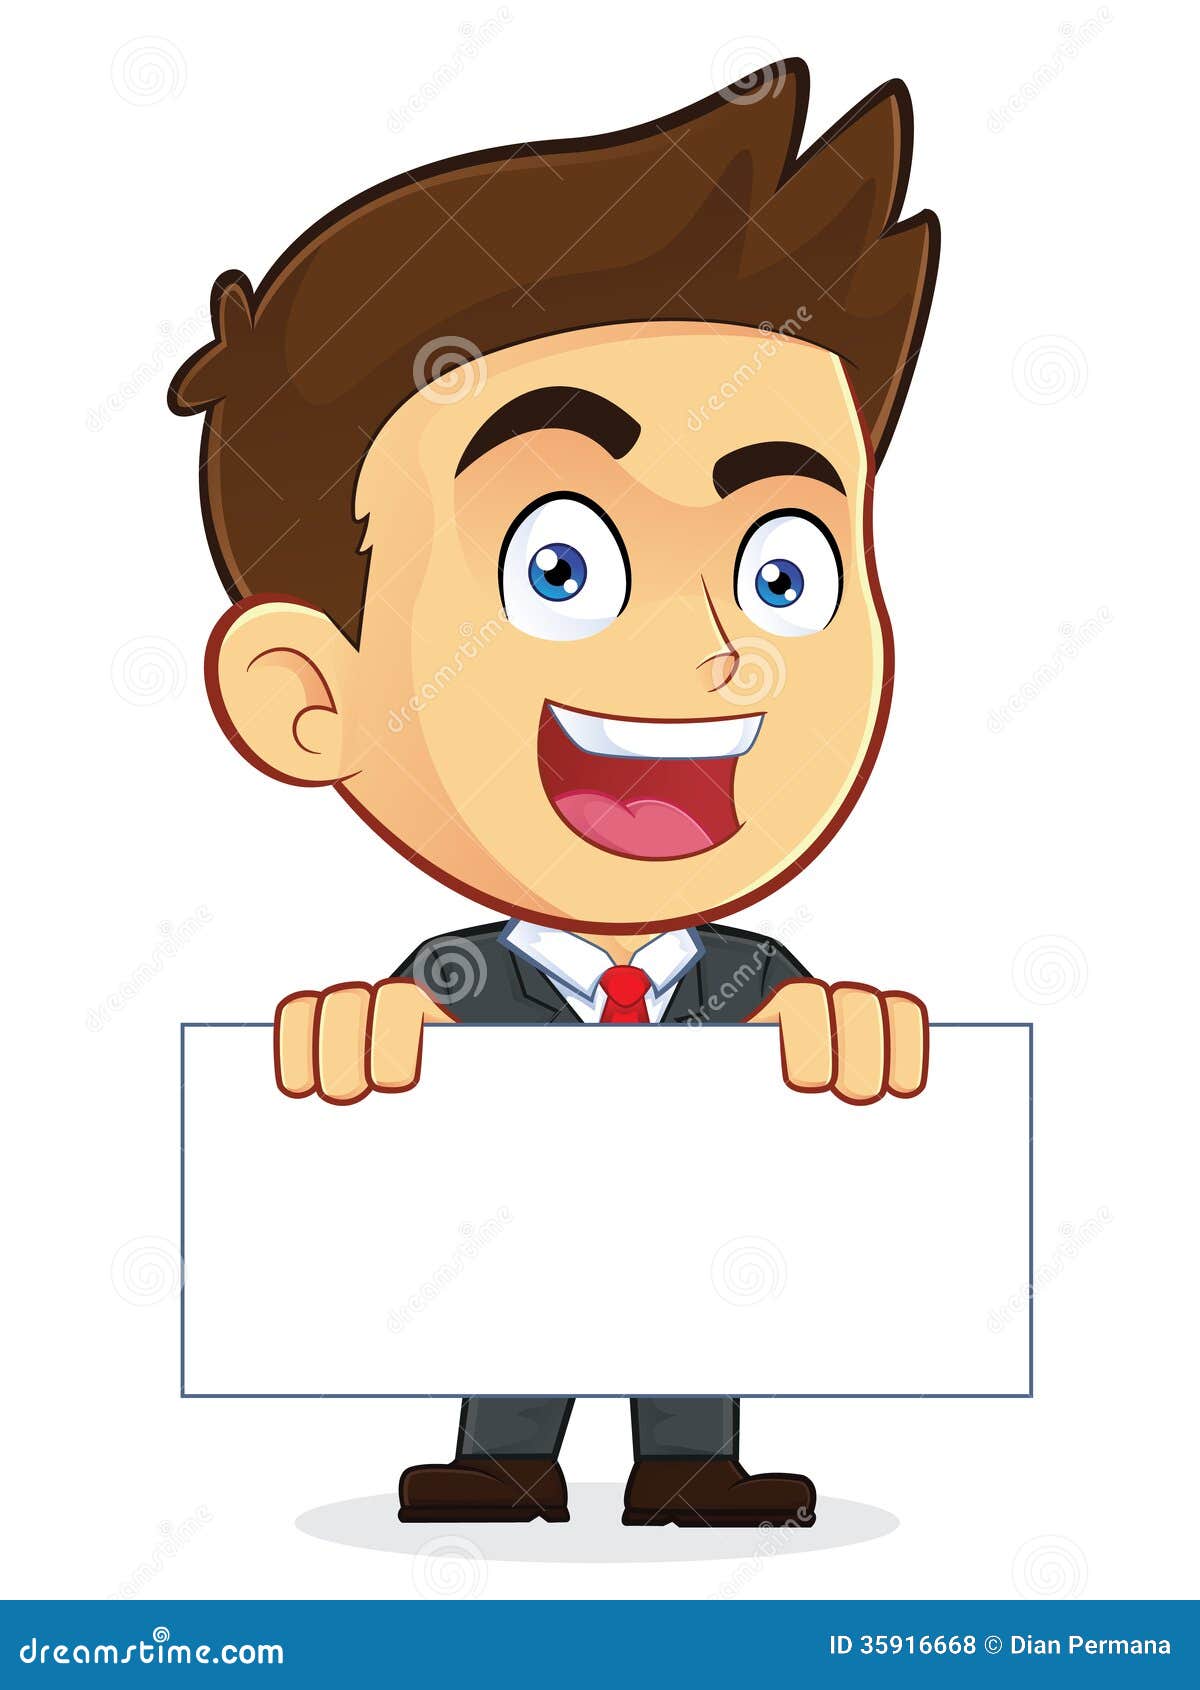 clipart man holding sign - photo #37